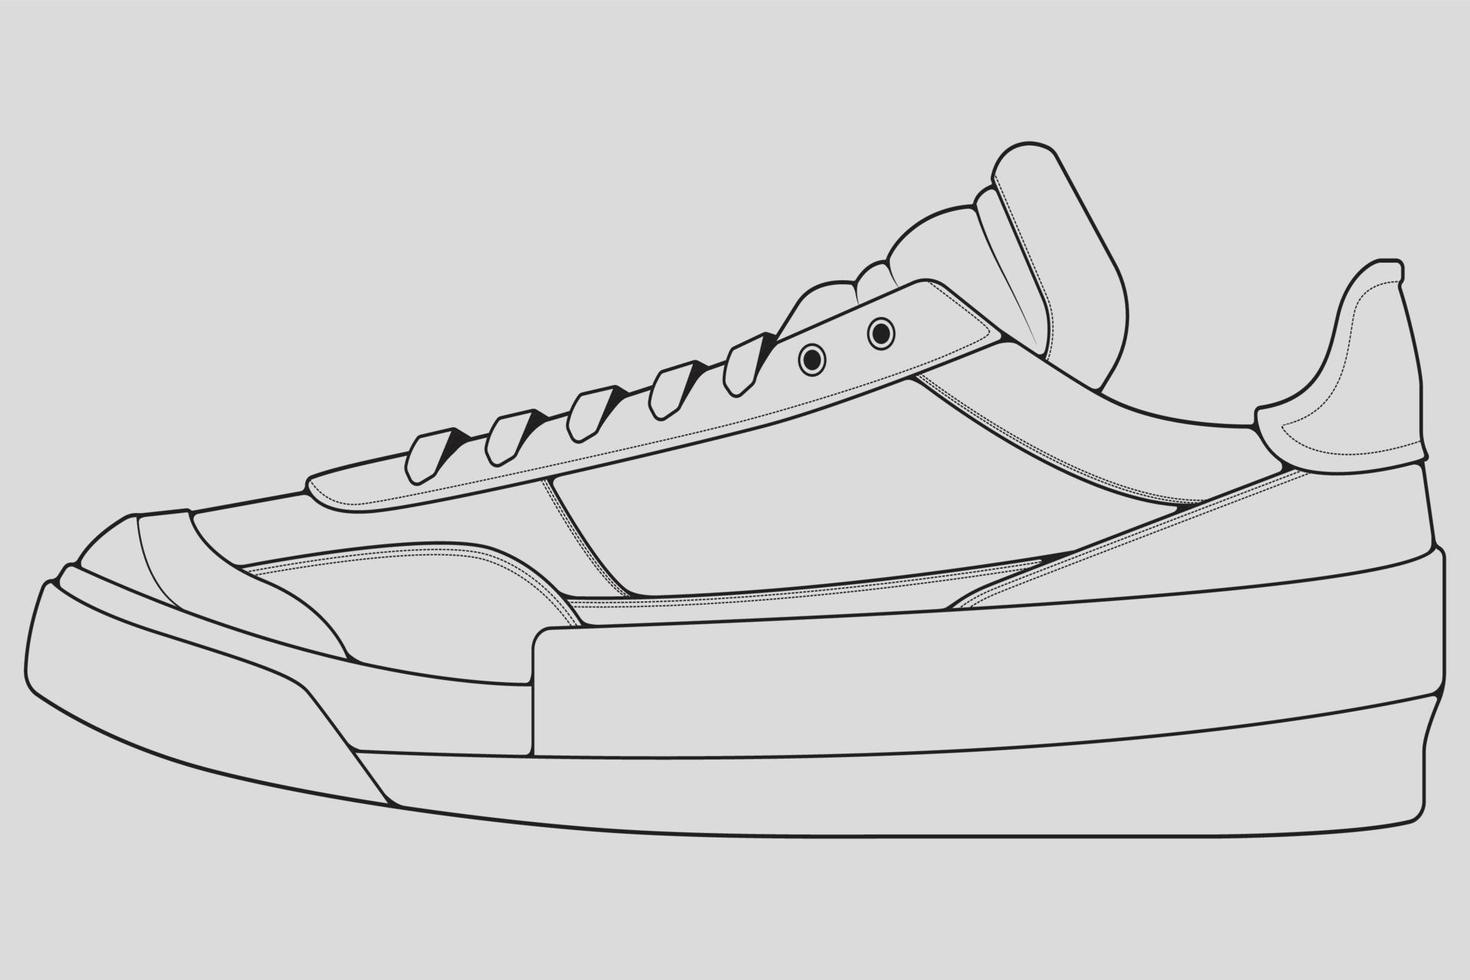 Shoes sneaker outline drawing vector, Sneakers drawn in a sketch style, black line sneaker trainers template outline, vector Illustration. 6426735 Vector Art Vecteezy